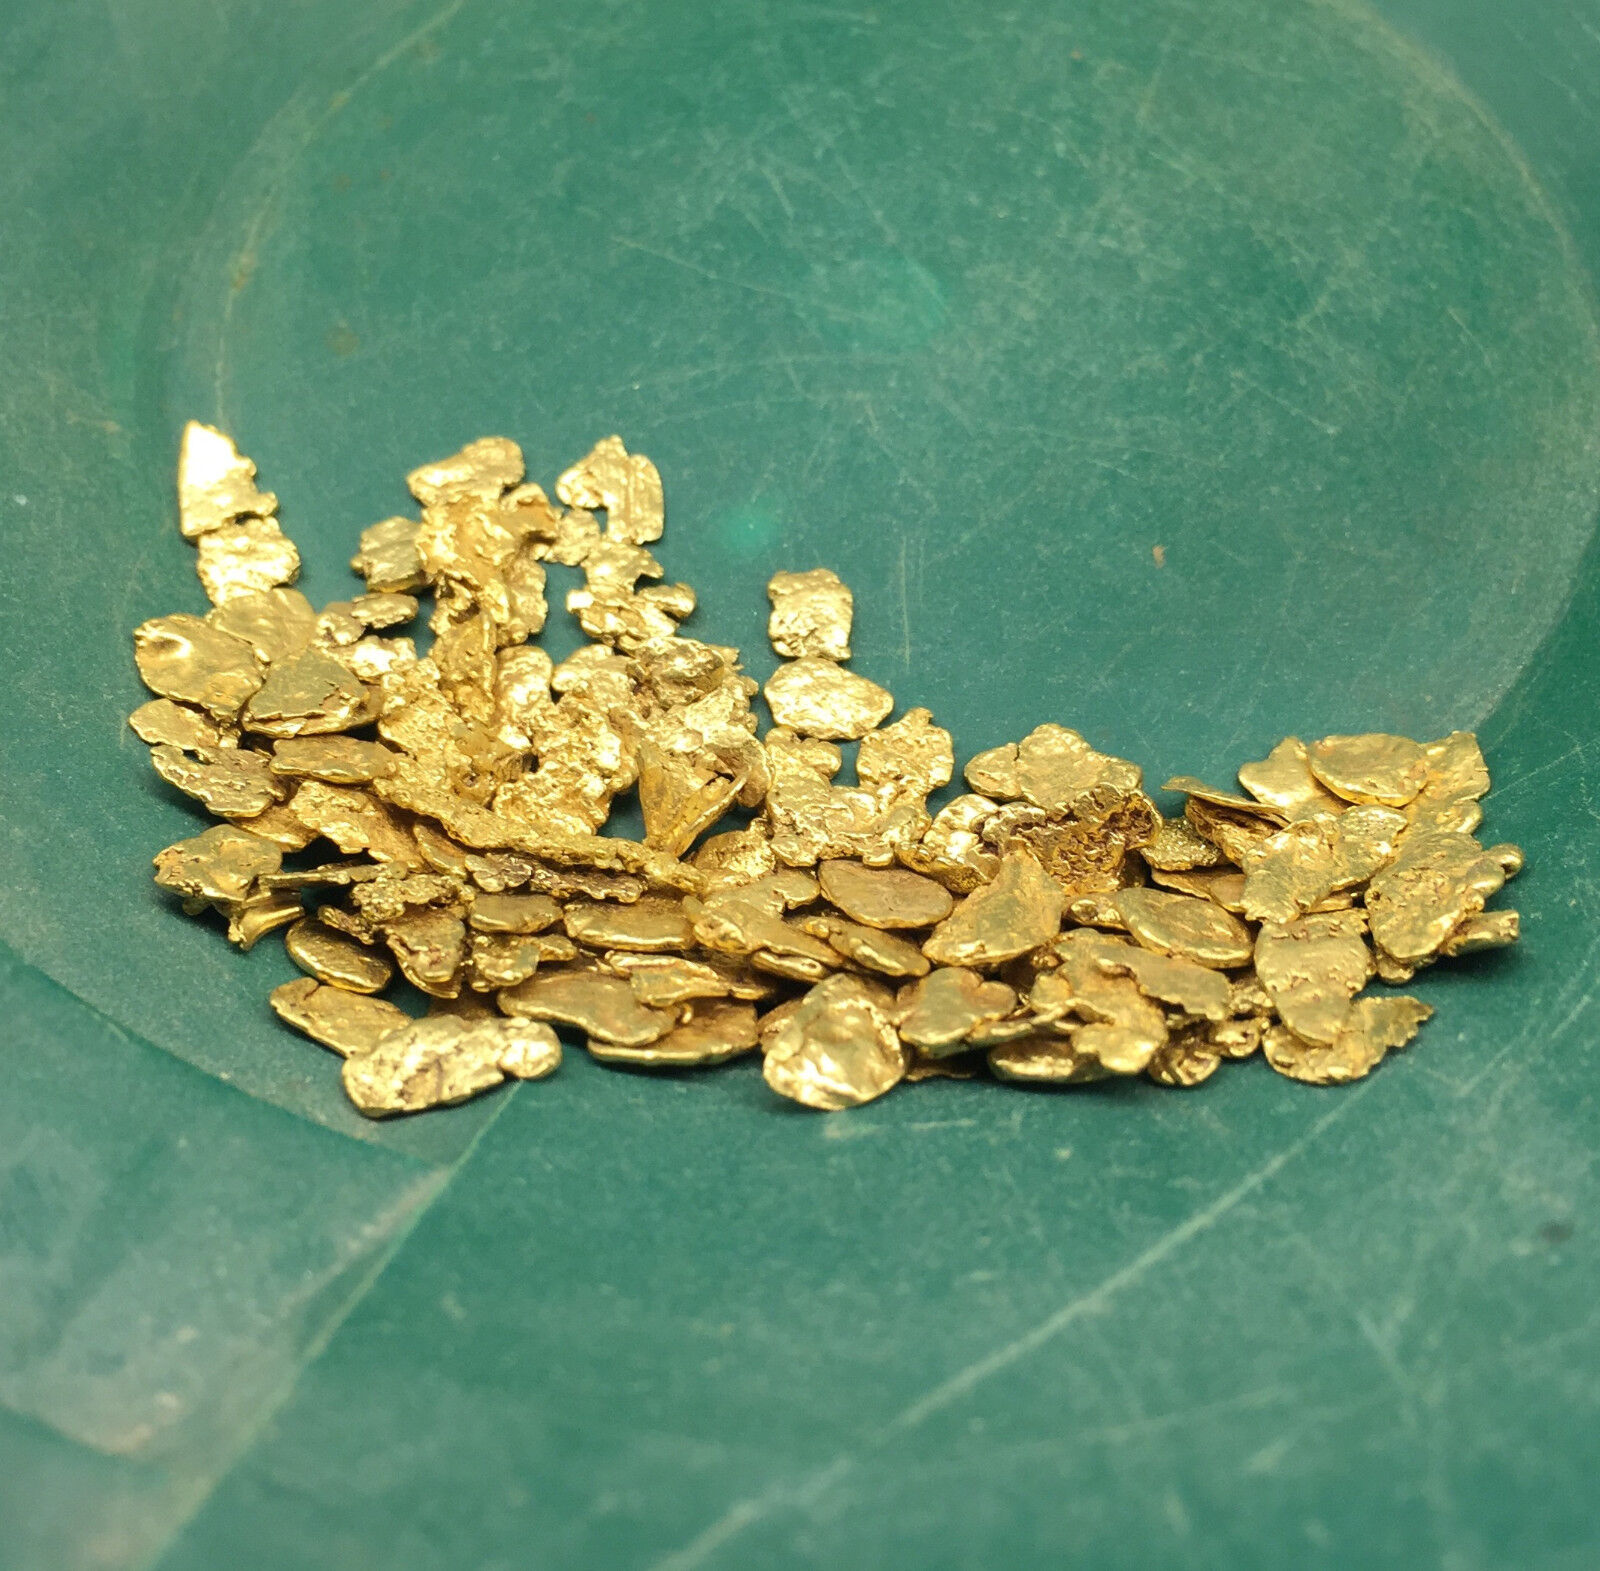 5 LB JACKPOT PAYDIRT ™ Gold Panning Concentrate - Find Nuggets Flakes Specimen